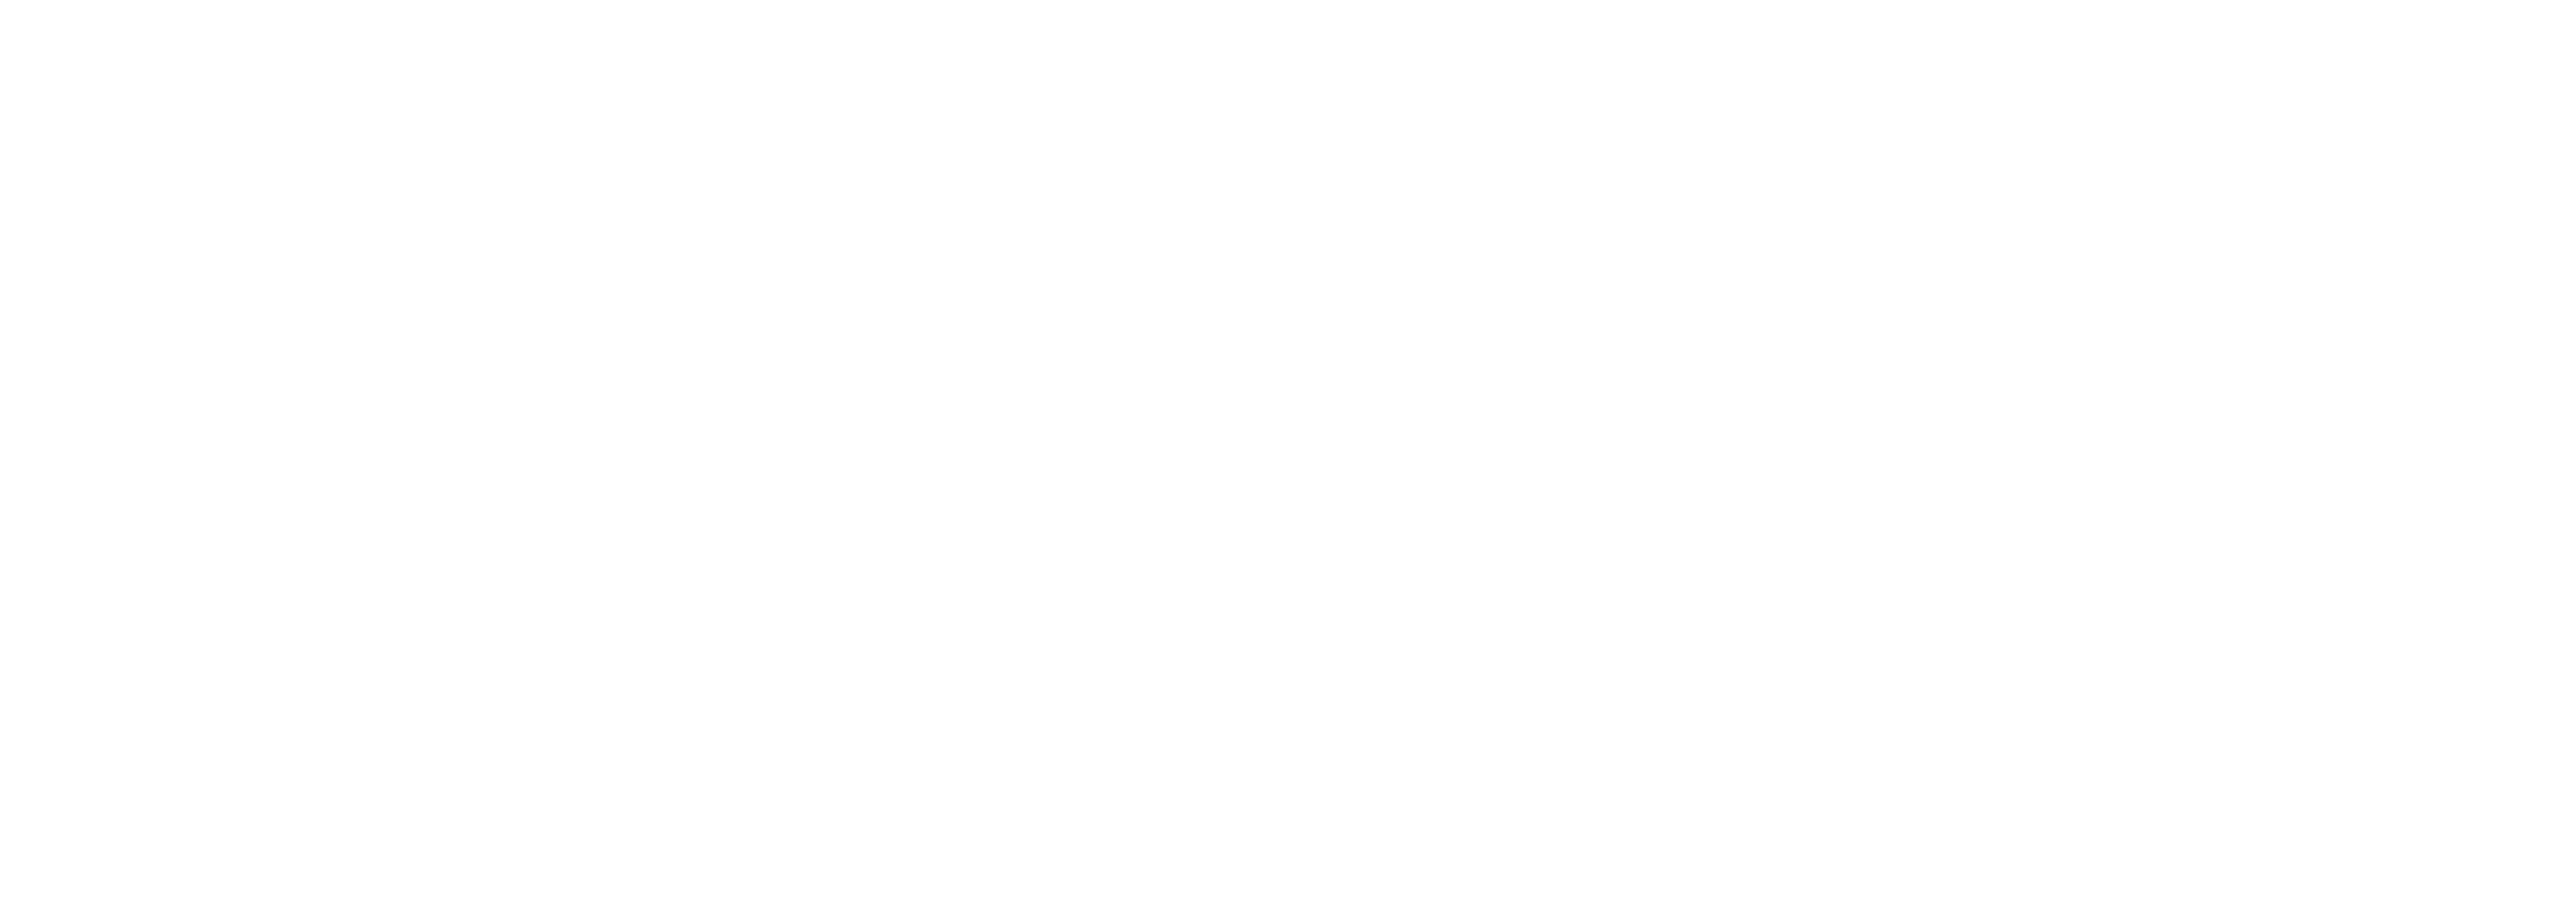 The Aortic Dissection Charitable Trust